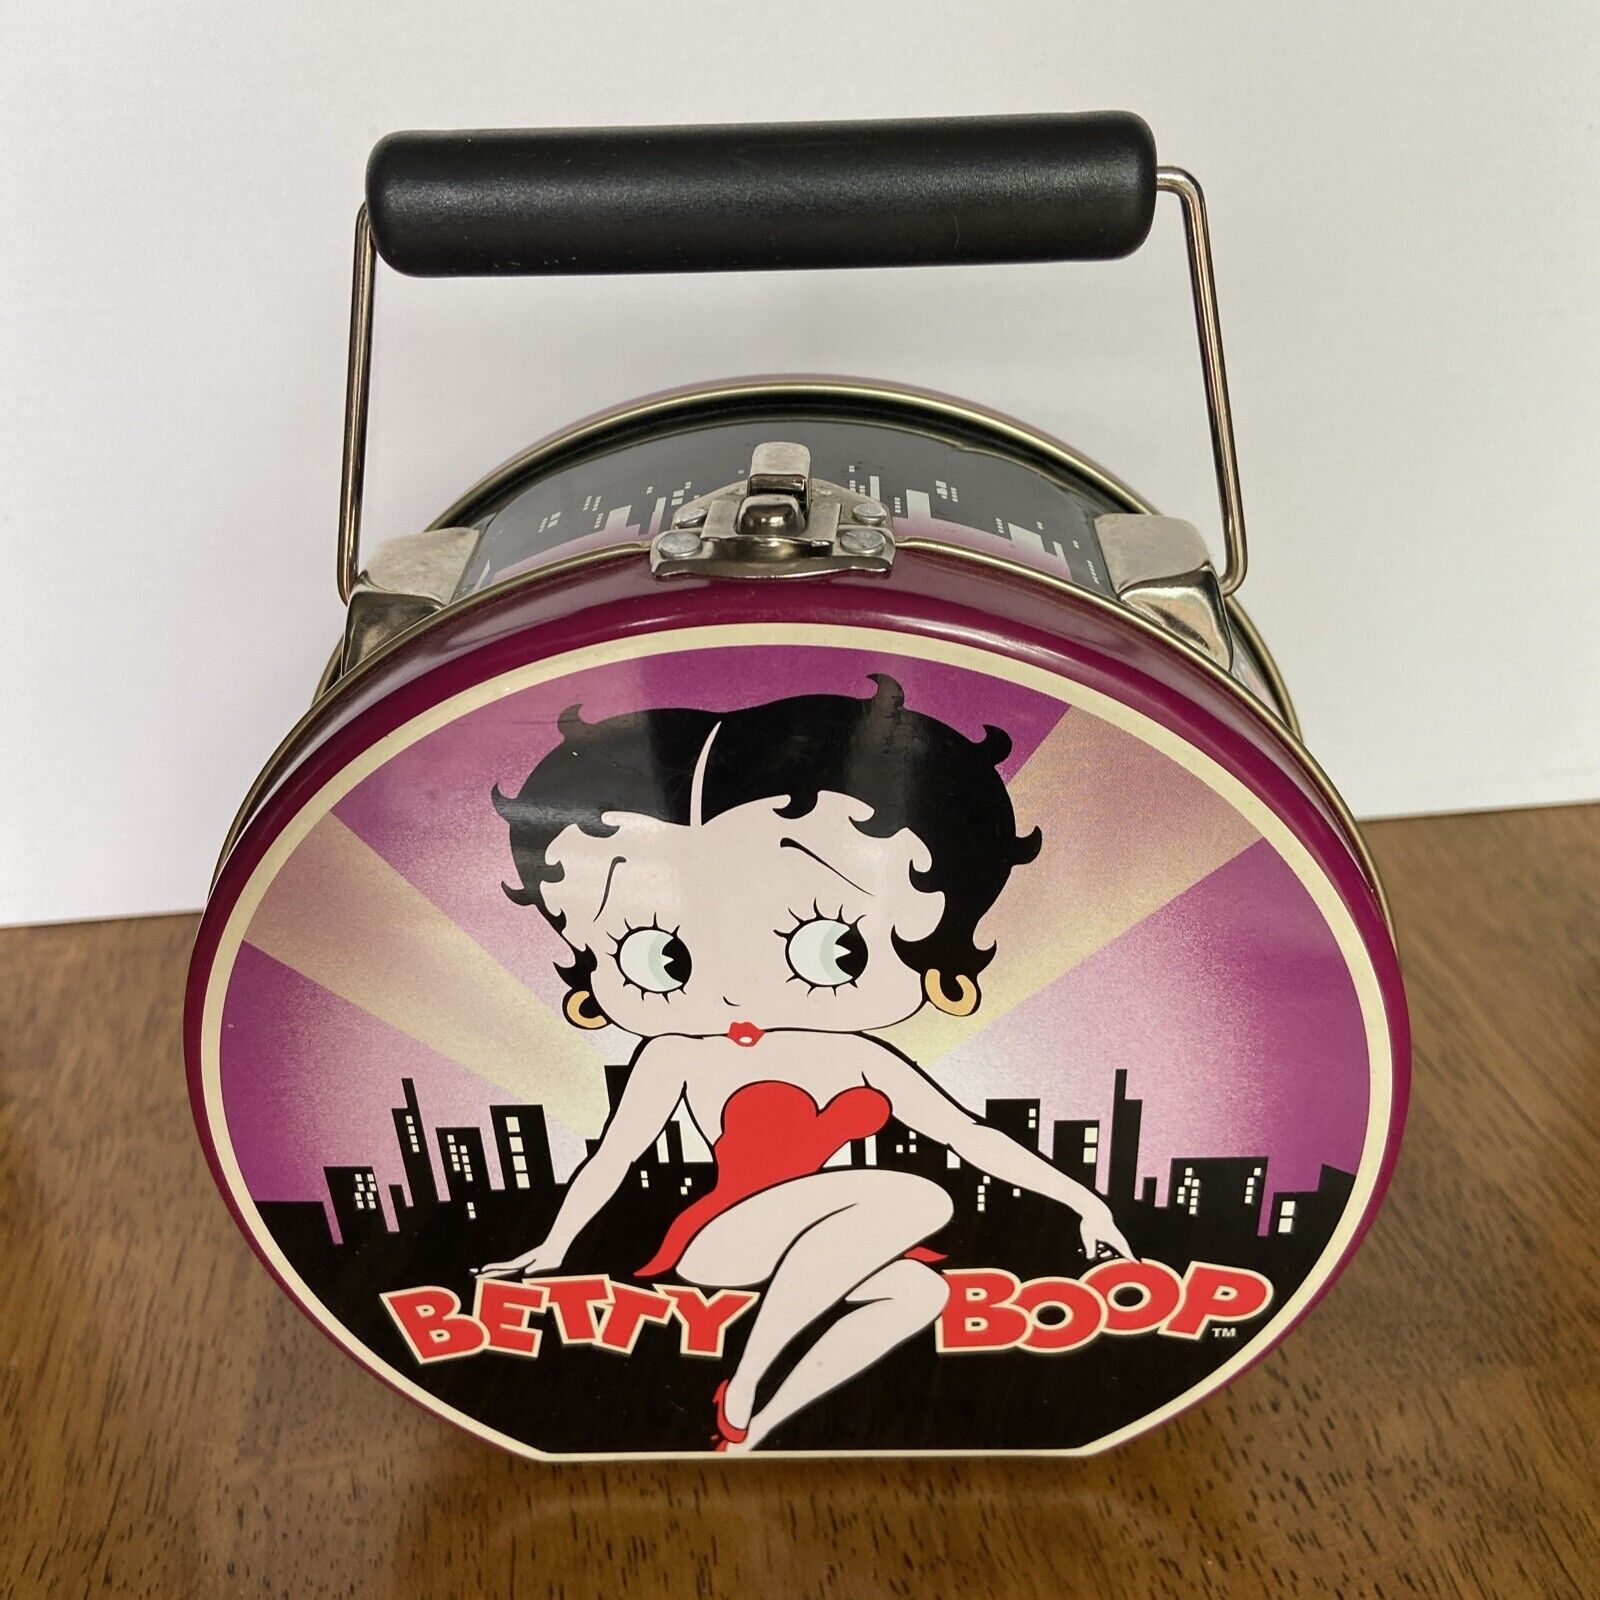 2005 Betty Boop Tin Lunchbox King Features Syndicate Inc. 6.25 In X 5.75 In